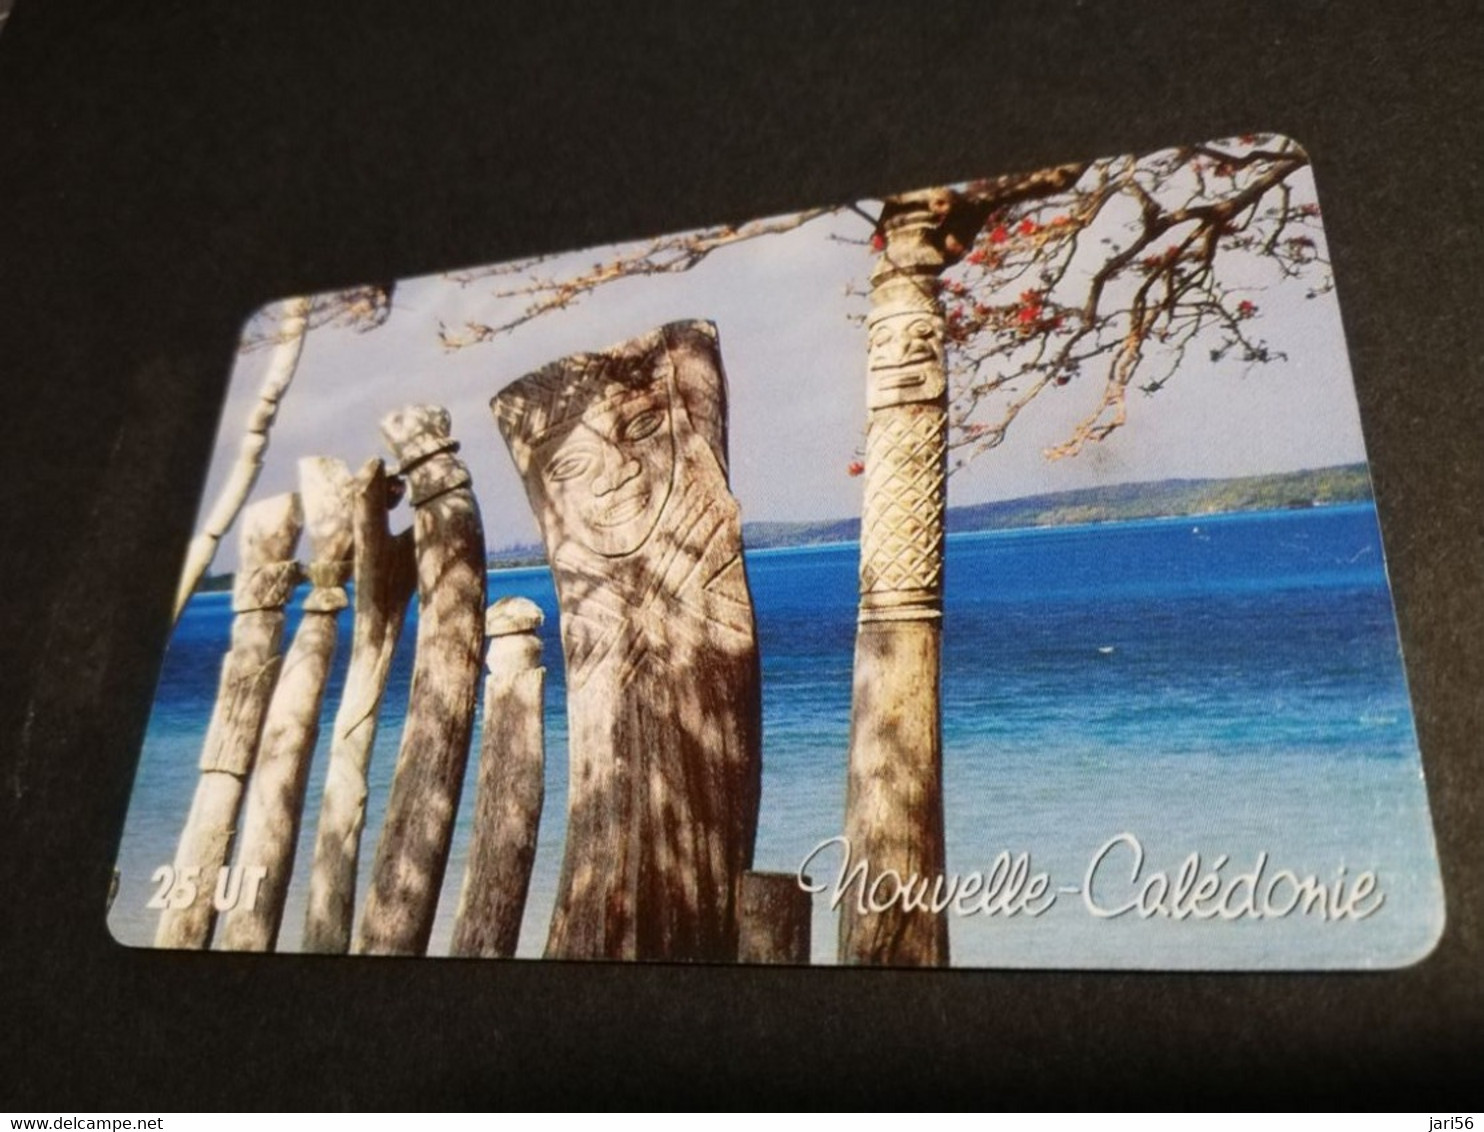 NOUVELLE CALEDONIA  CHIP CARD 25  UNITS  CARVED TREES AT BEACH         ** 4193 ** - Neukaledonien